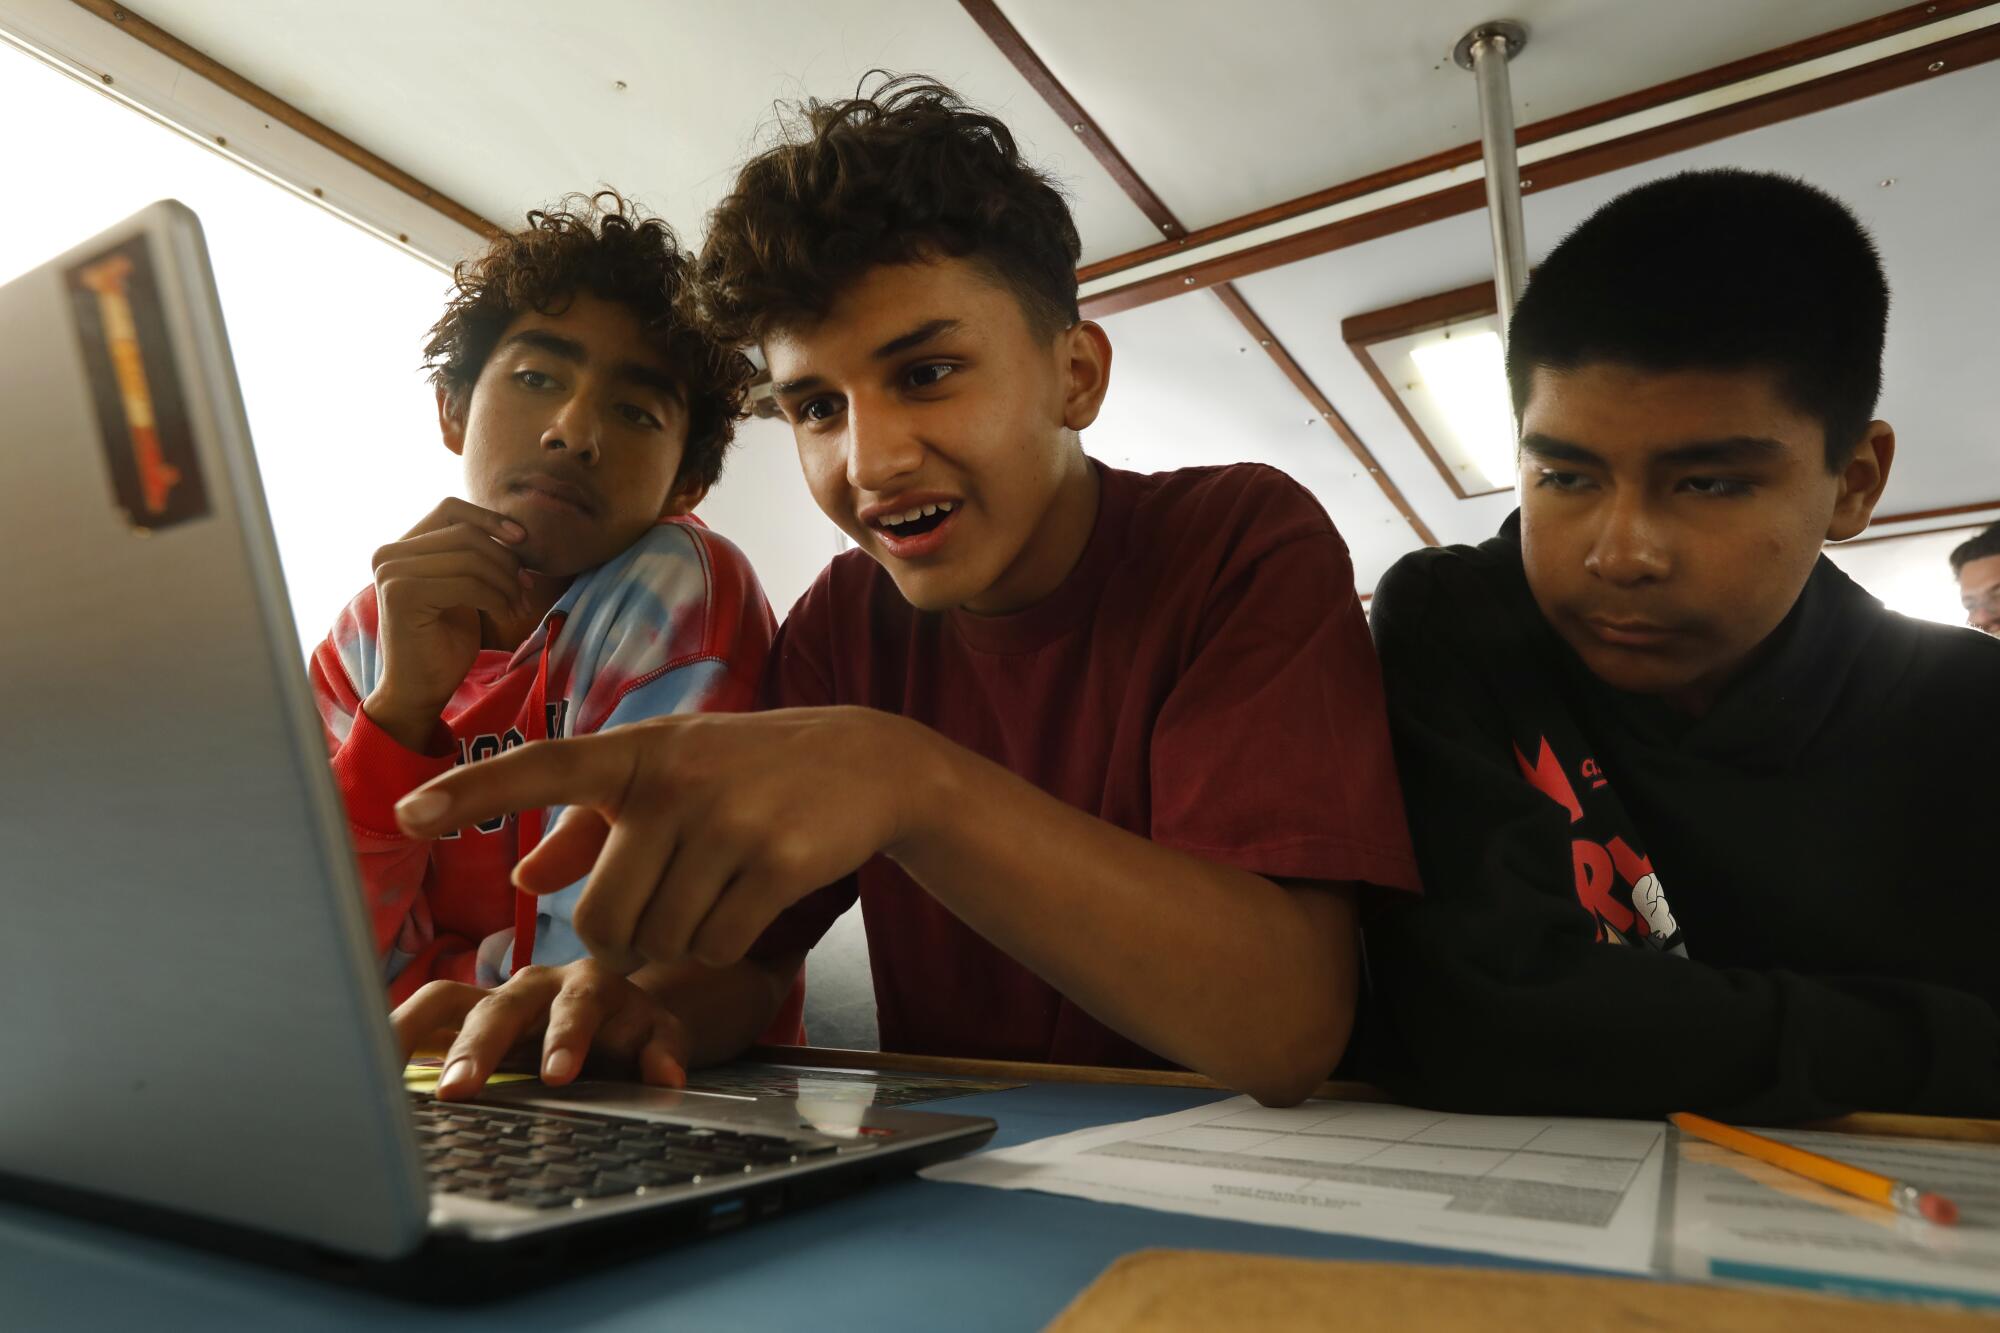 Three teens aboard a boat look at a laptop screen.